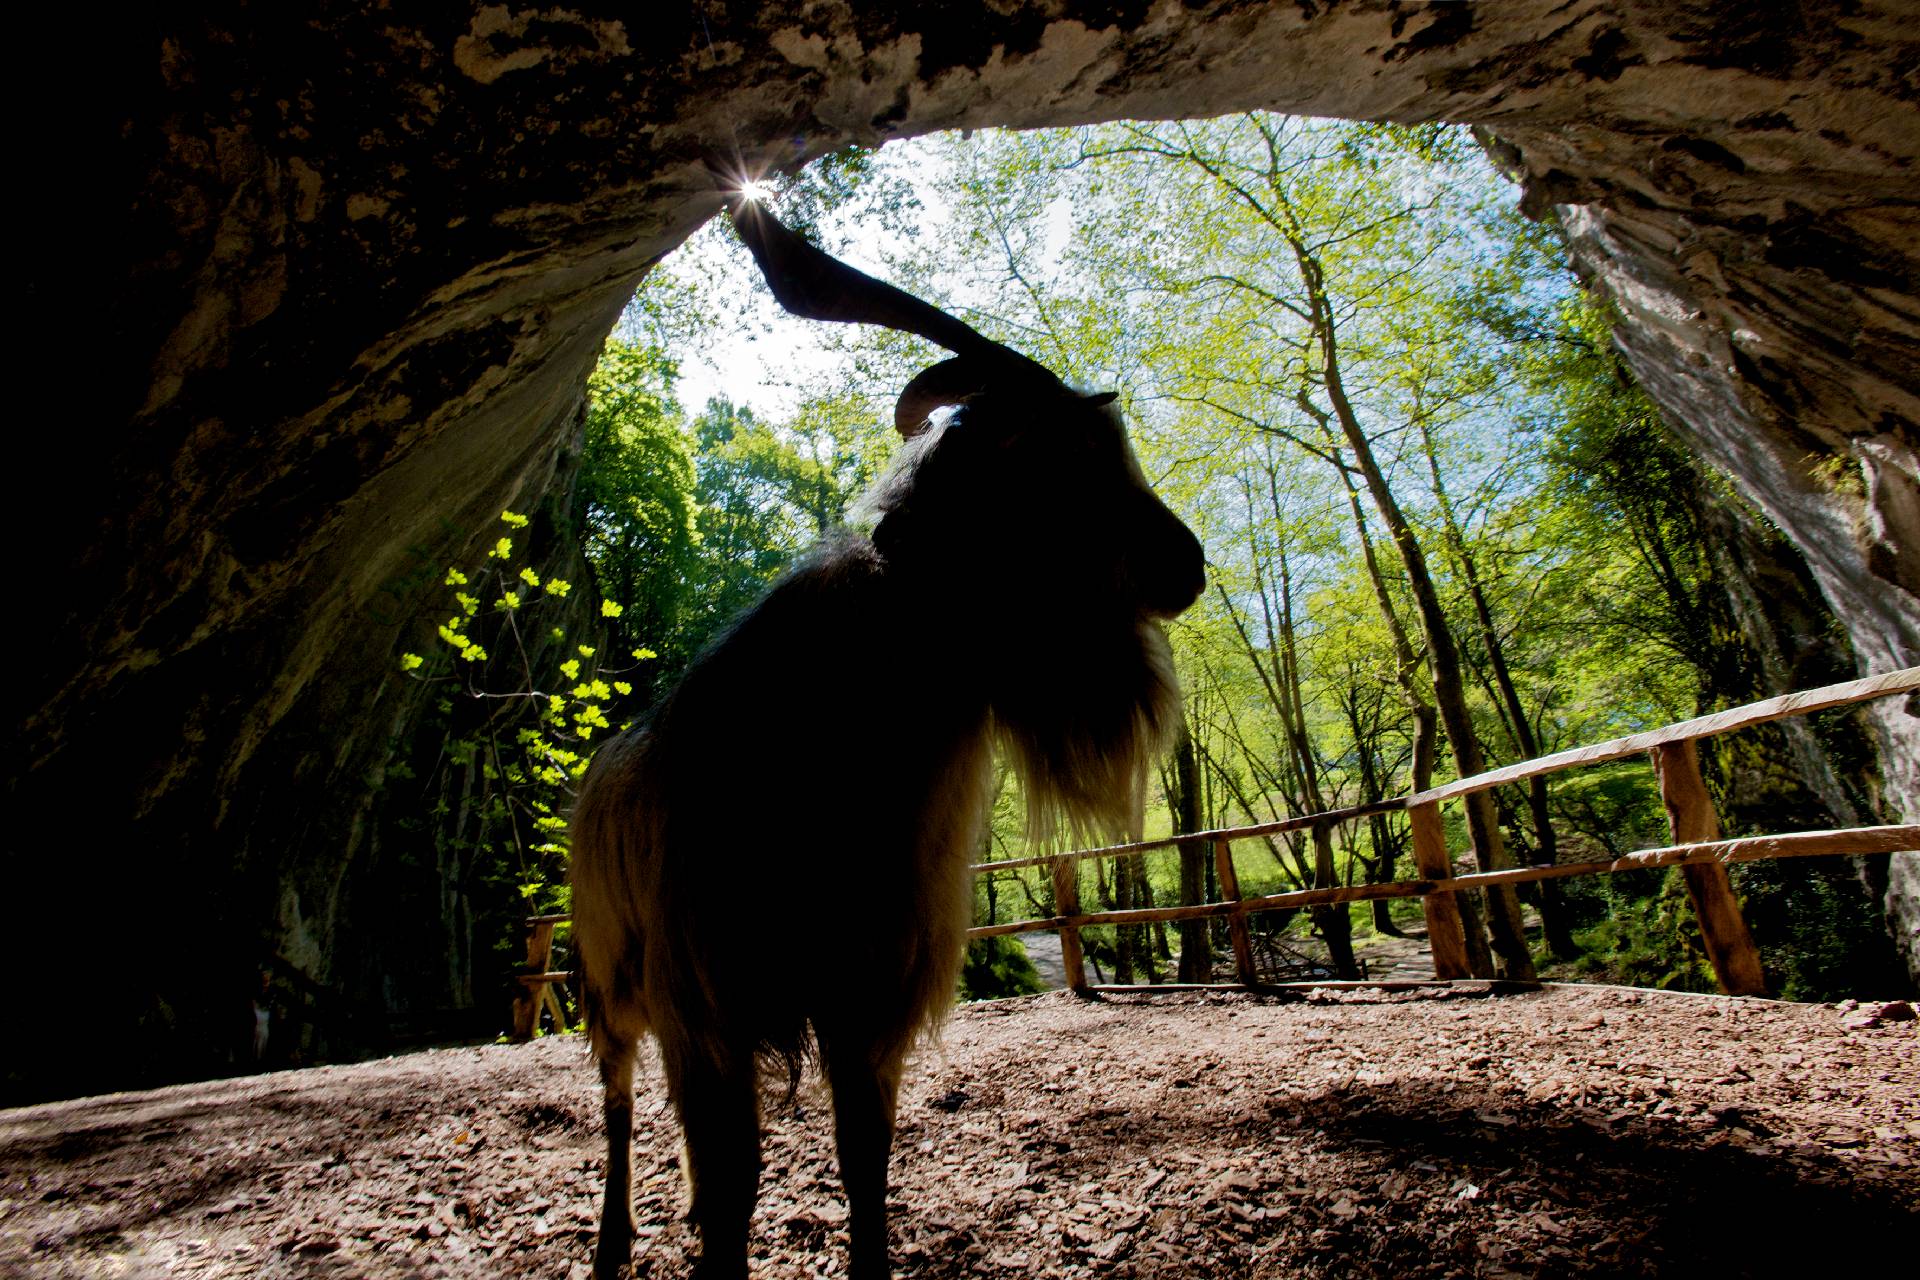 Male goat (aker) at the entrance of the Zugarramurdi Cave